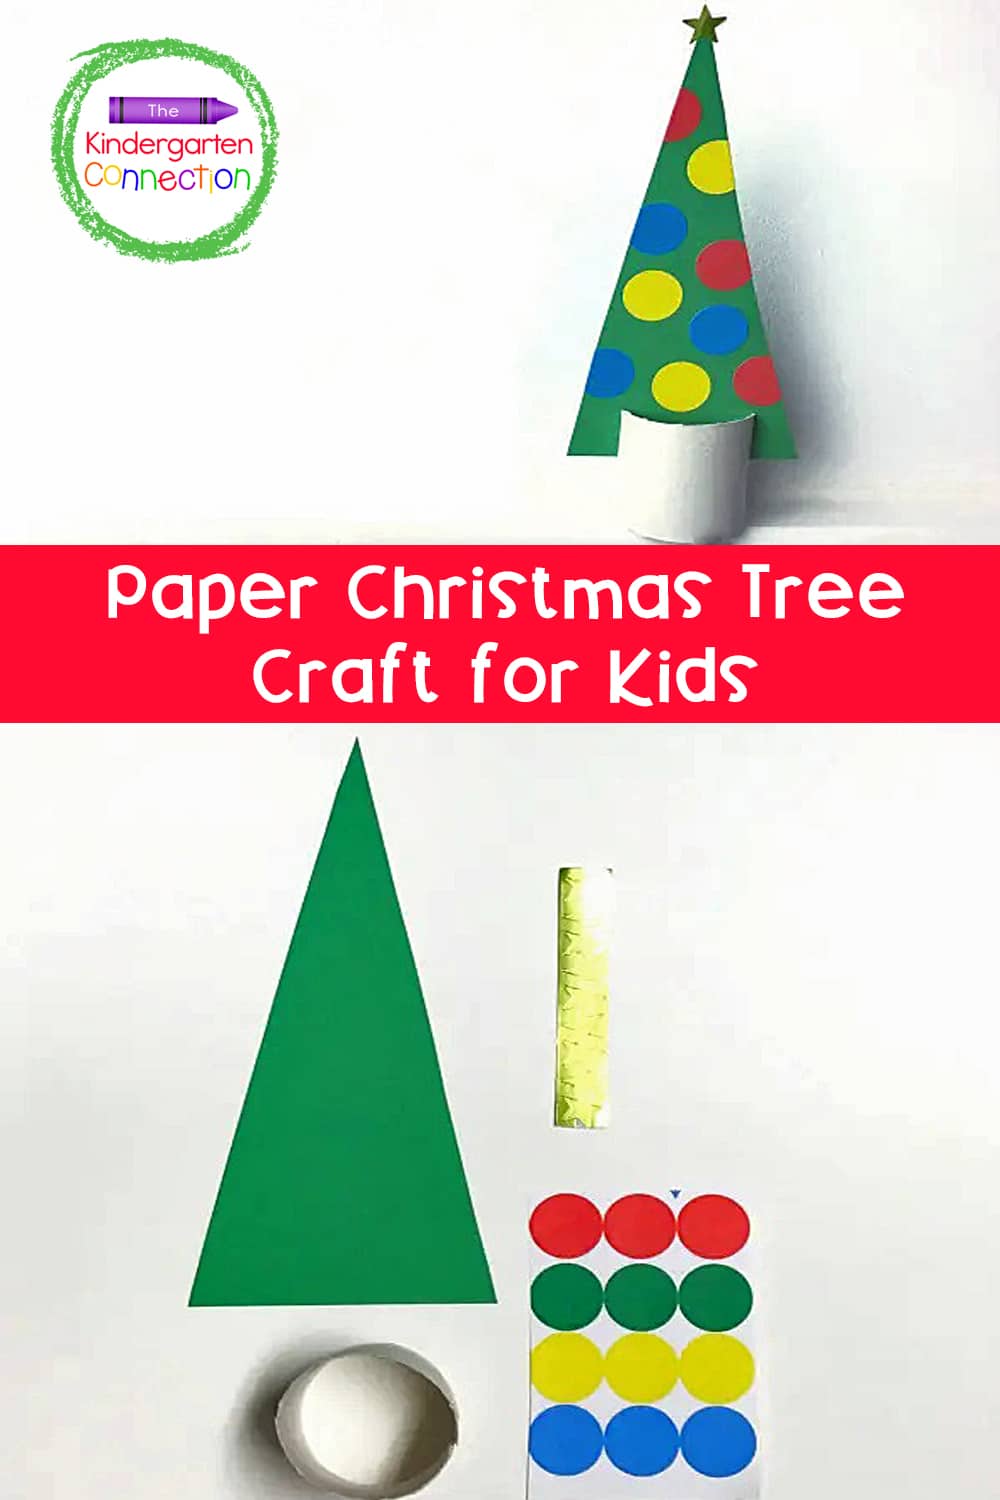 This paper Christmas tree craft is the perfect low-prep activity that will encourage creativity and strengthen fine motor skills too!